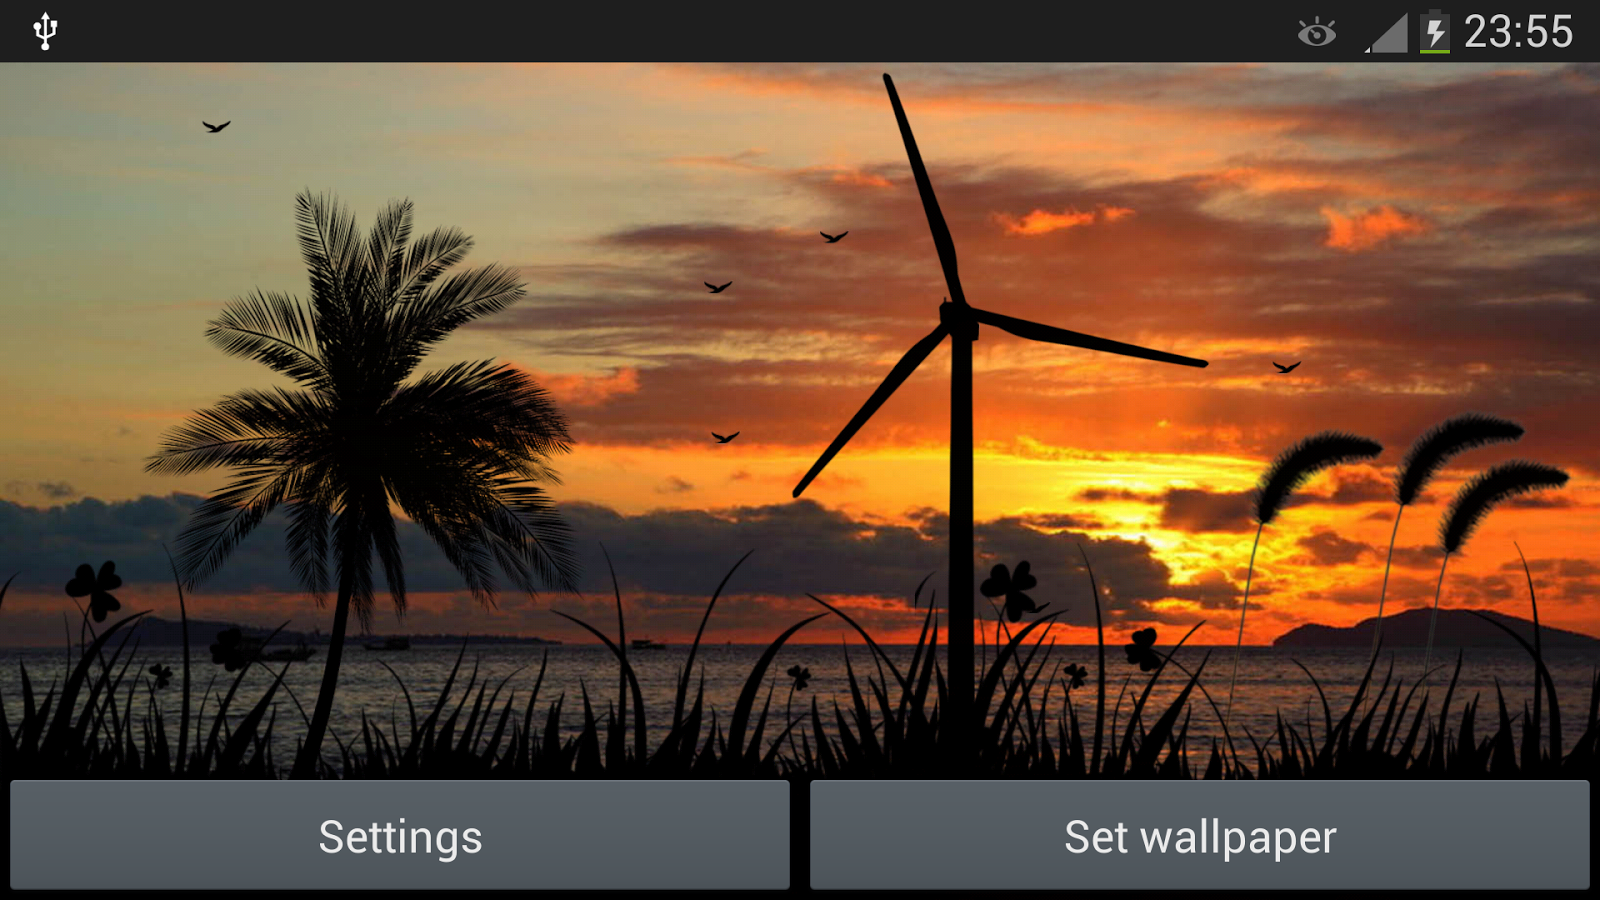 Background Image Windmill Turning Swaying Coconut Trees The Wind